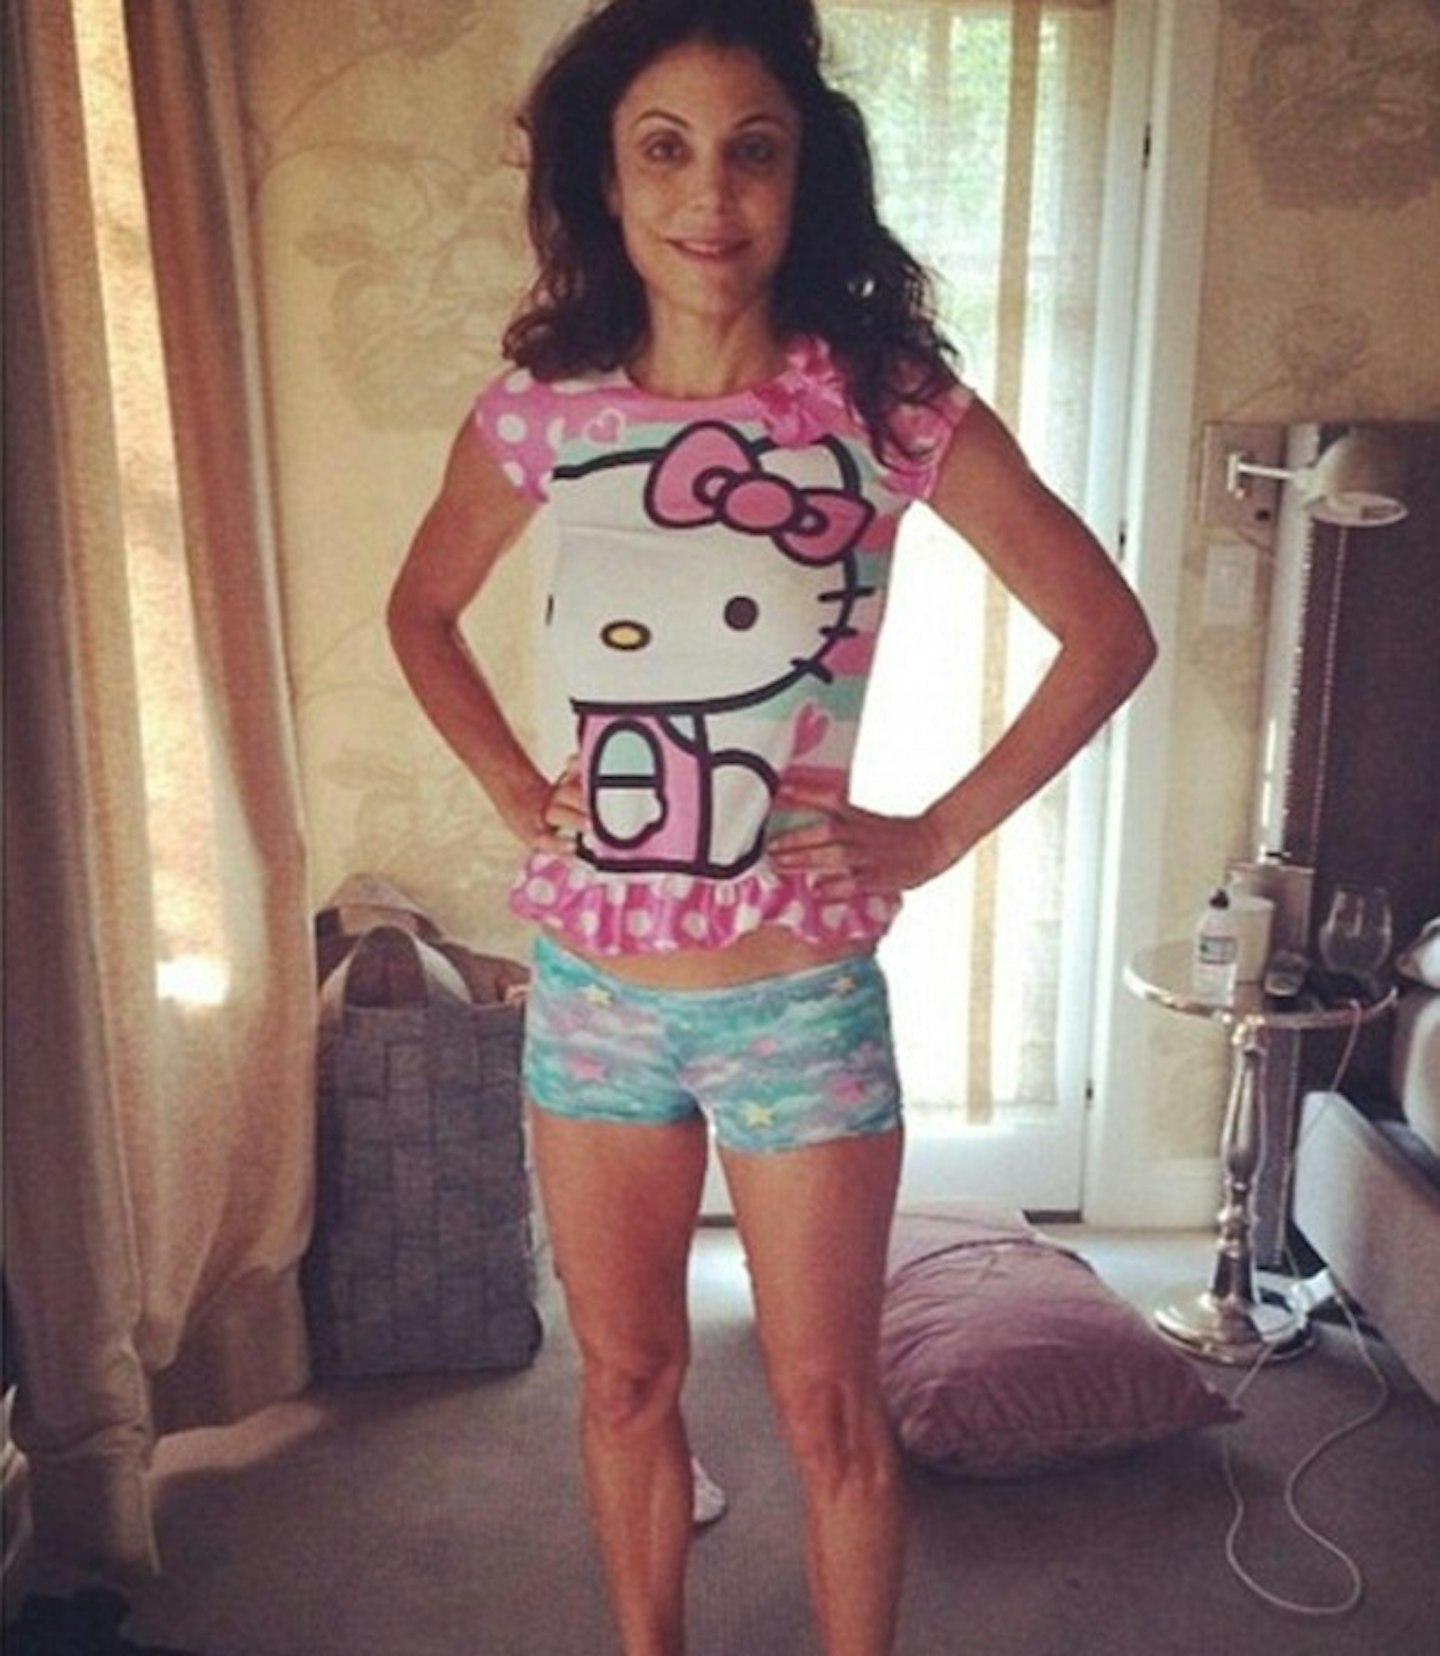 Yeah, here's Bethenny Frankel wearing her four-year-old's pjs...